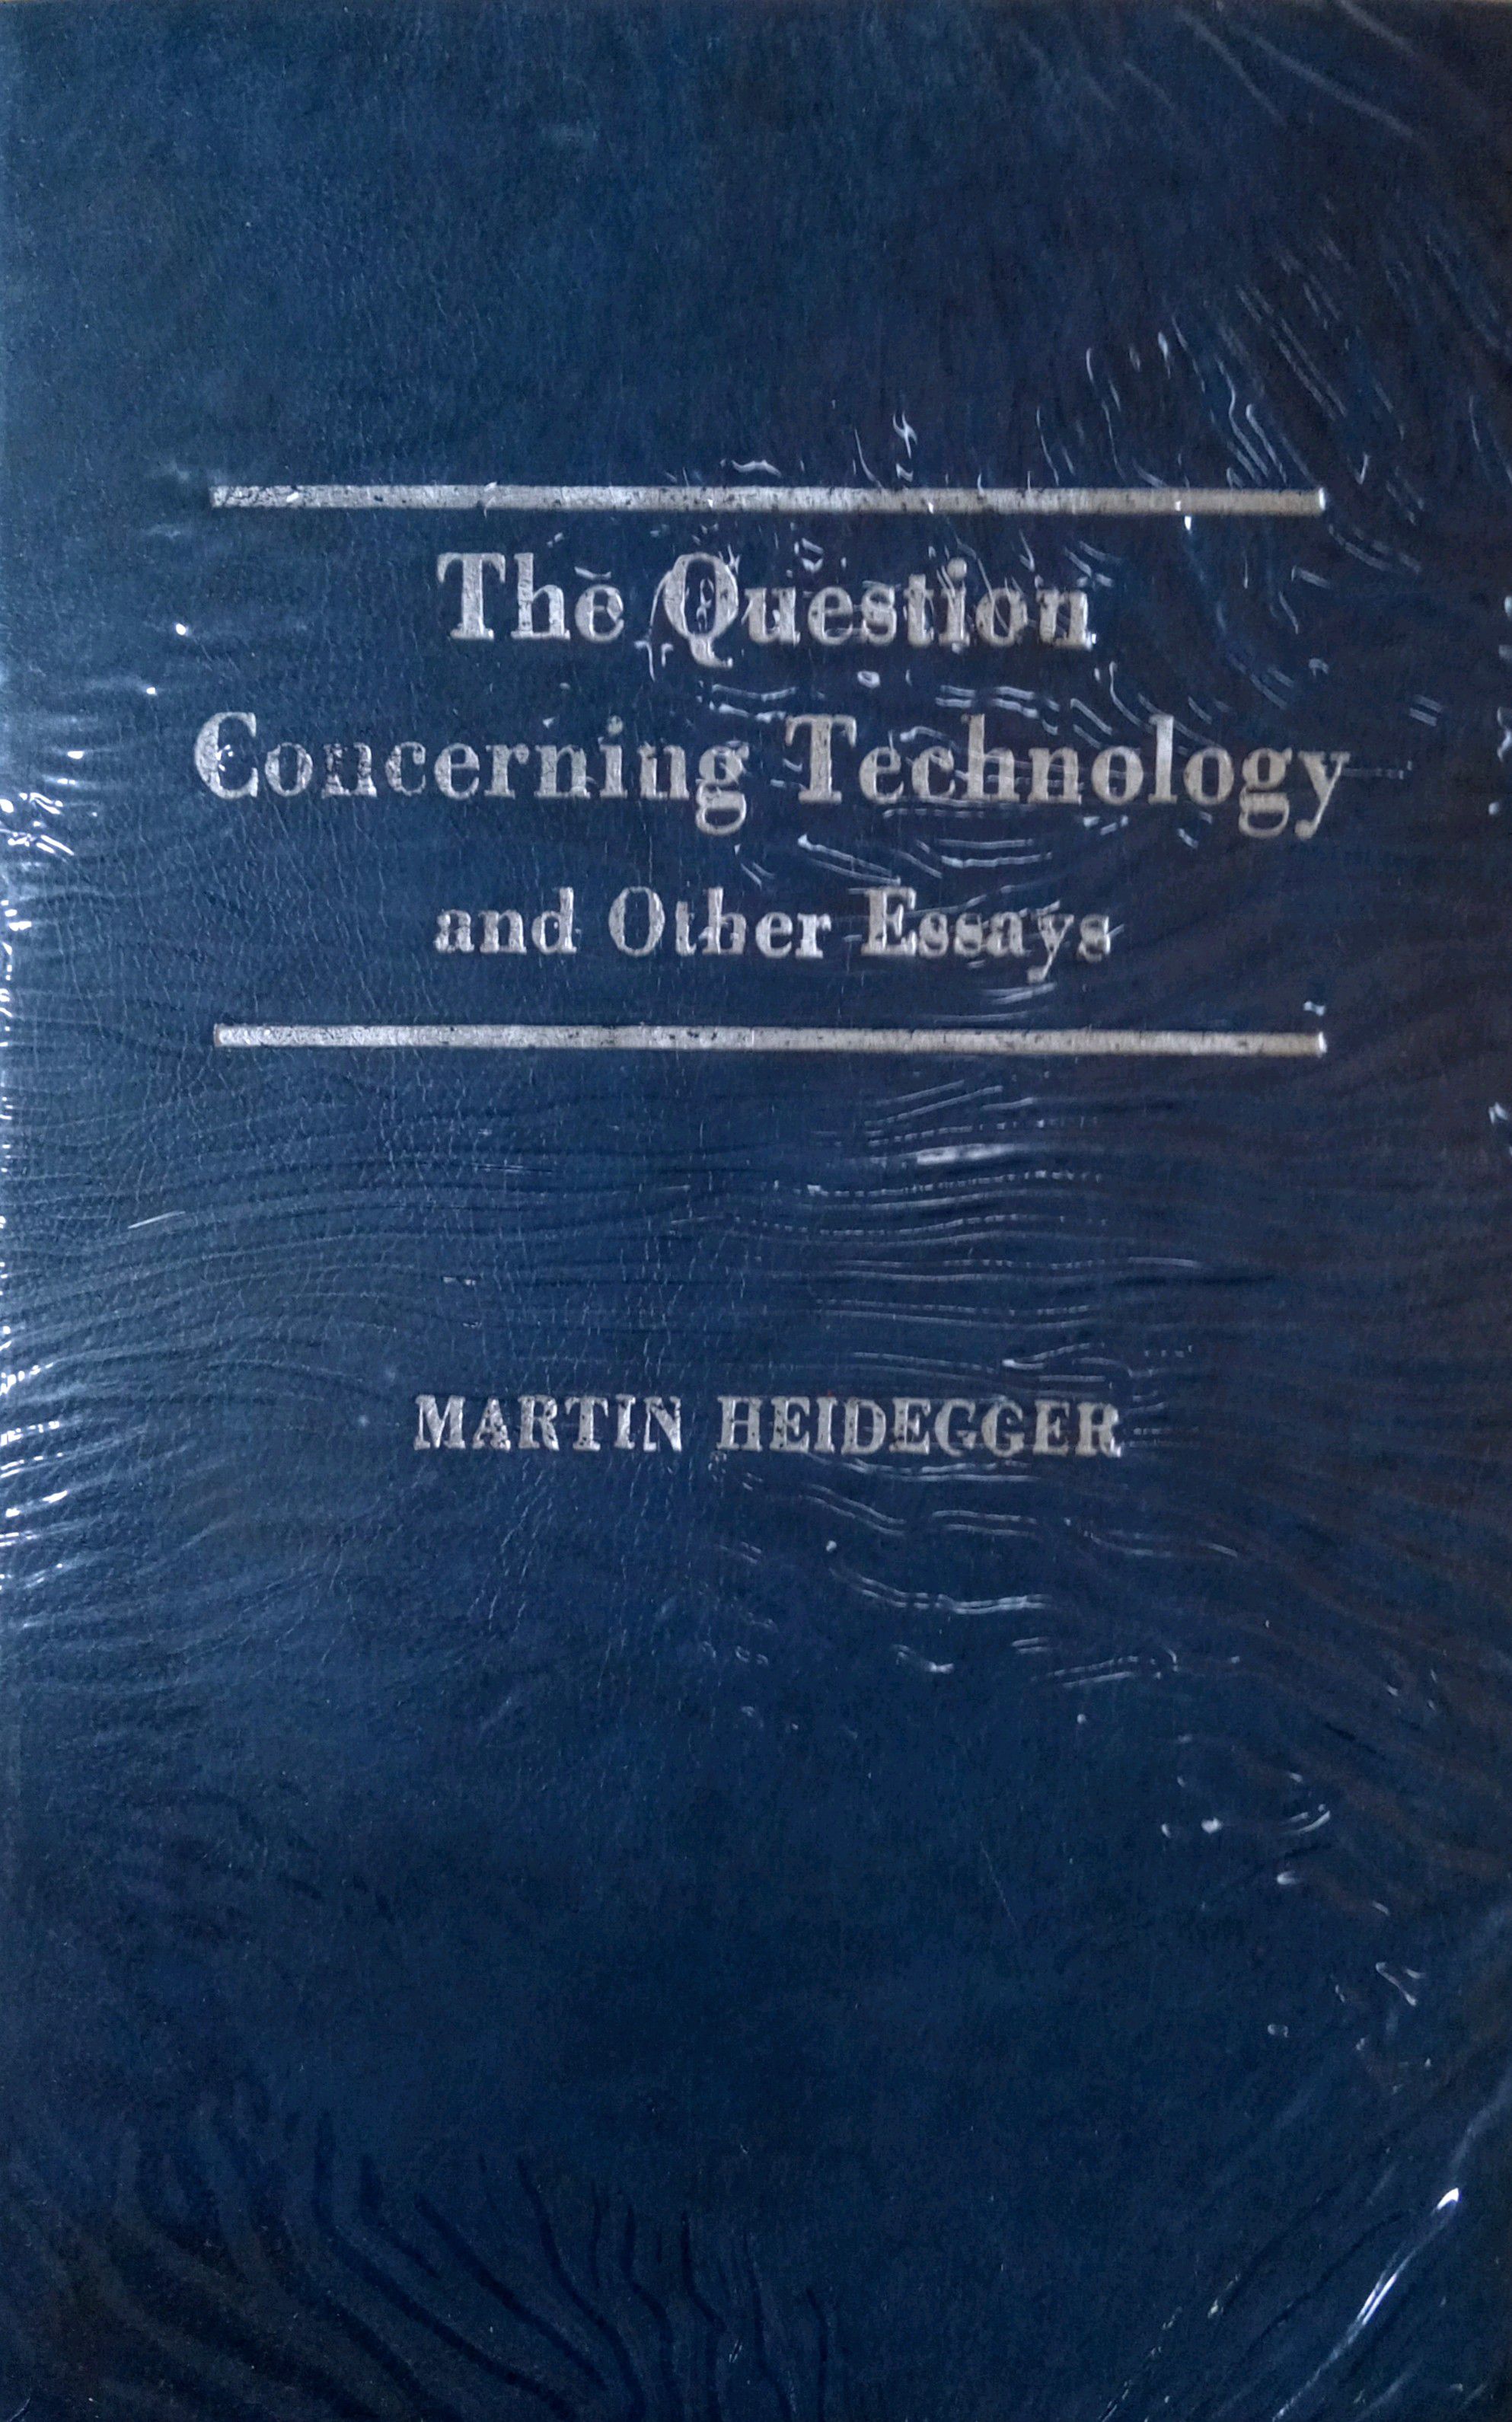 THE QUESTION CONCERNING TECHNOLOGY AND OTHER ESSAYS